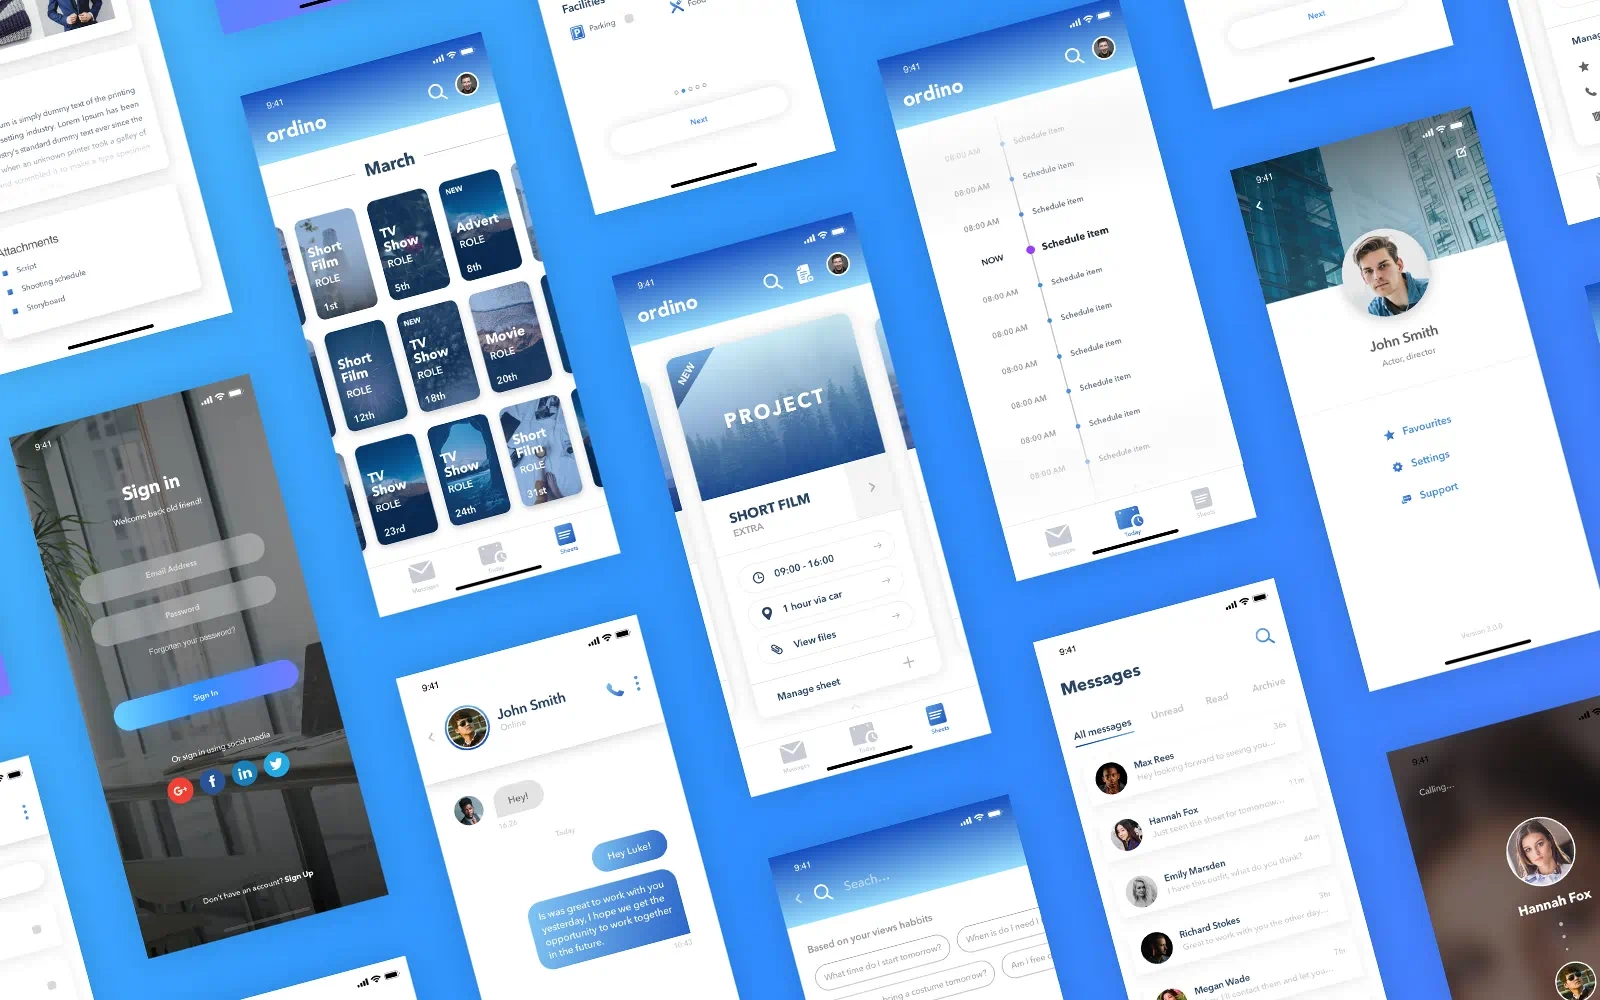 Screenshots from the Ordino app displayed in a grid at a slight angle on a blue background, highlighting the app’s features